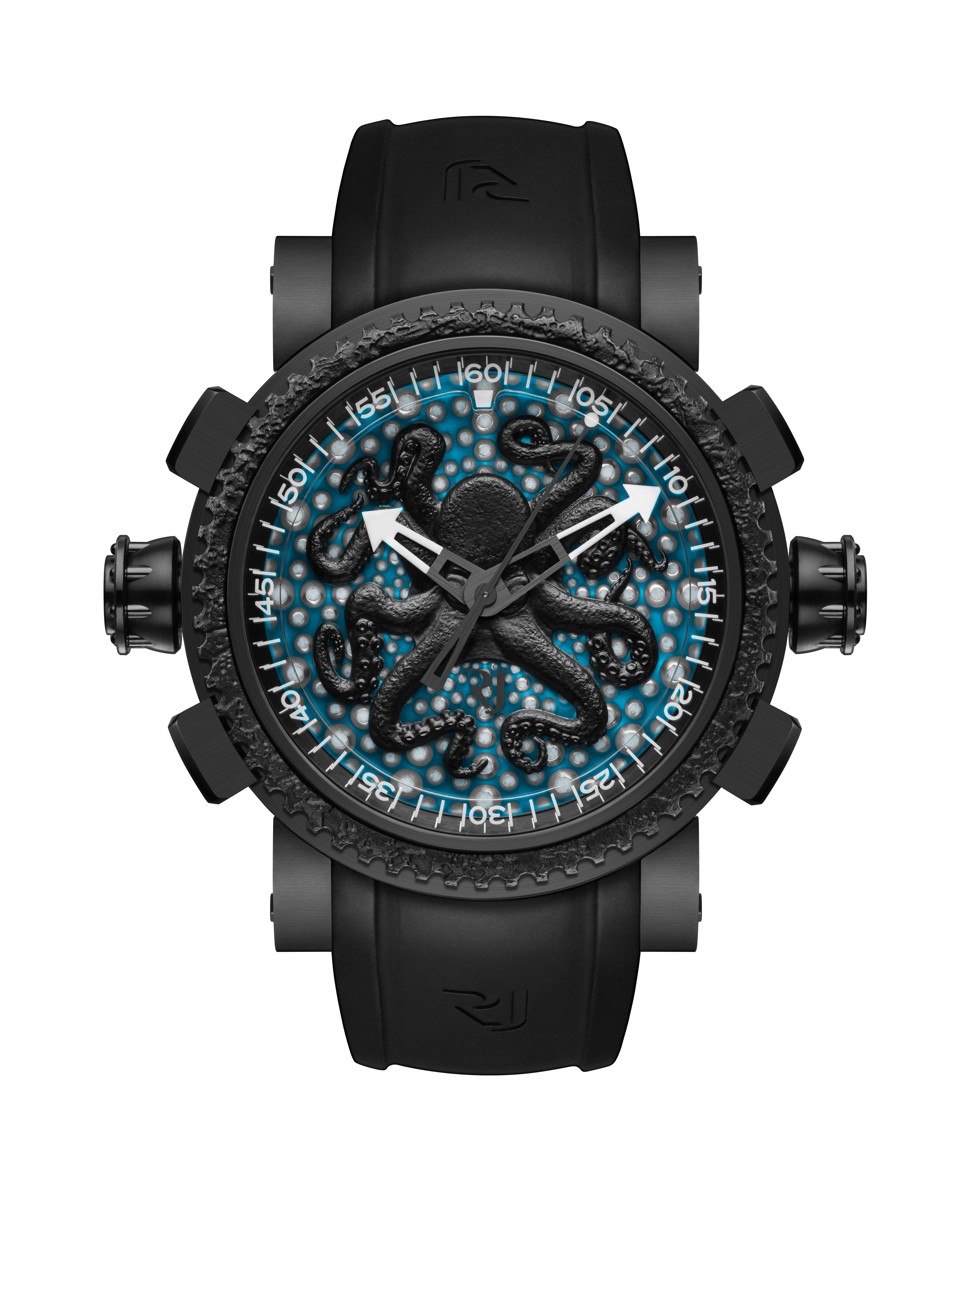 ROMAIN JEROME. The new Deep Blue Octopus incorporates all characteristics and aesthetical features of the animal. The dial features a sea urchin skeleton structure. The black PVD-coated steel notched bezel contains steel from the Titanic. Only 25 pieces are available, HK$172,500